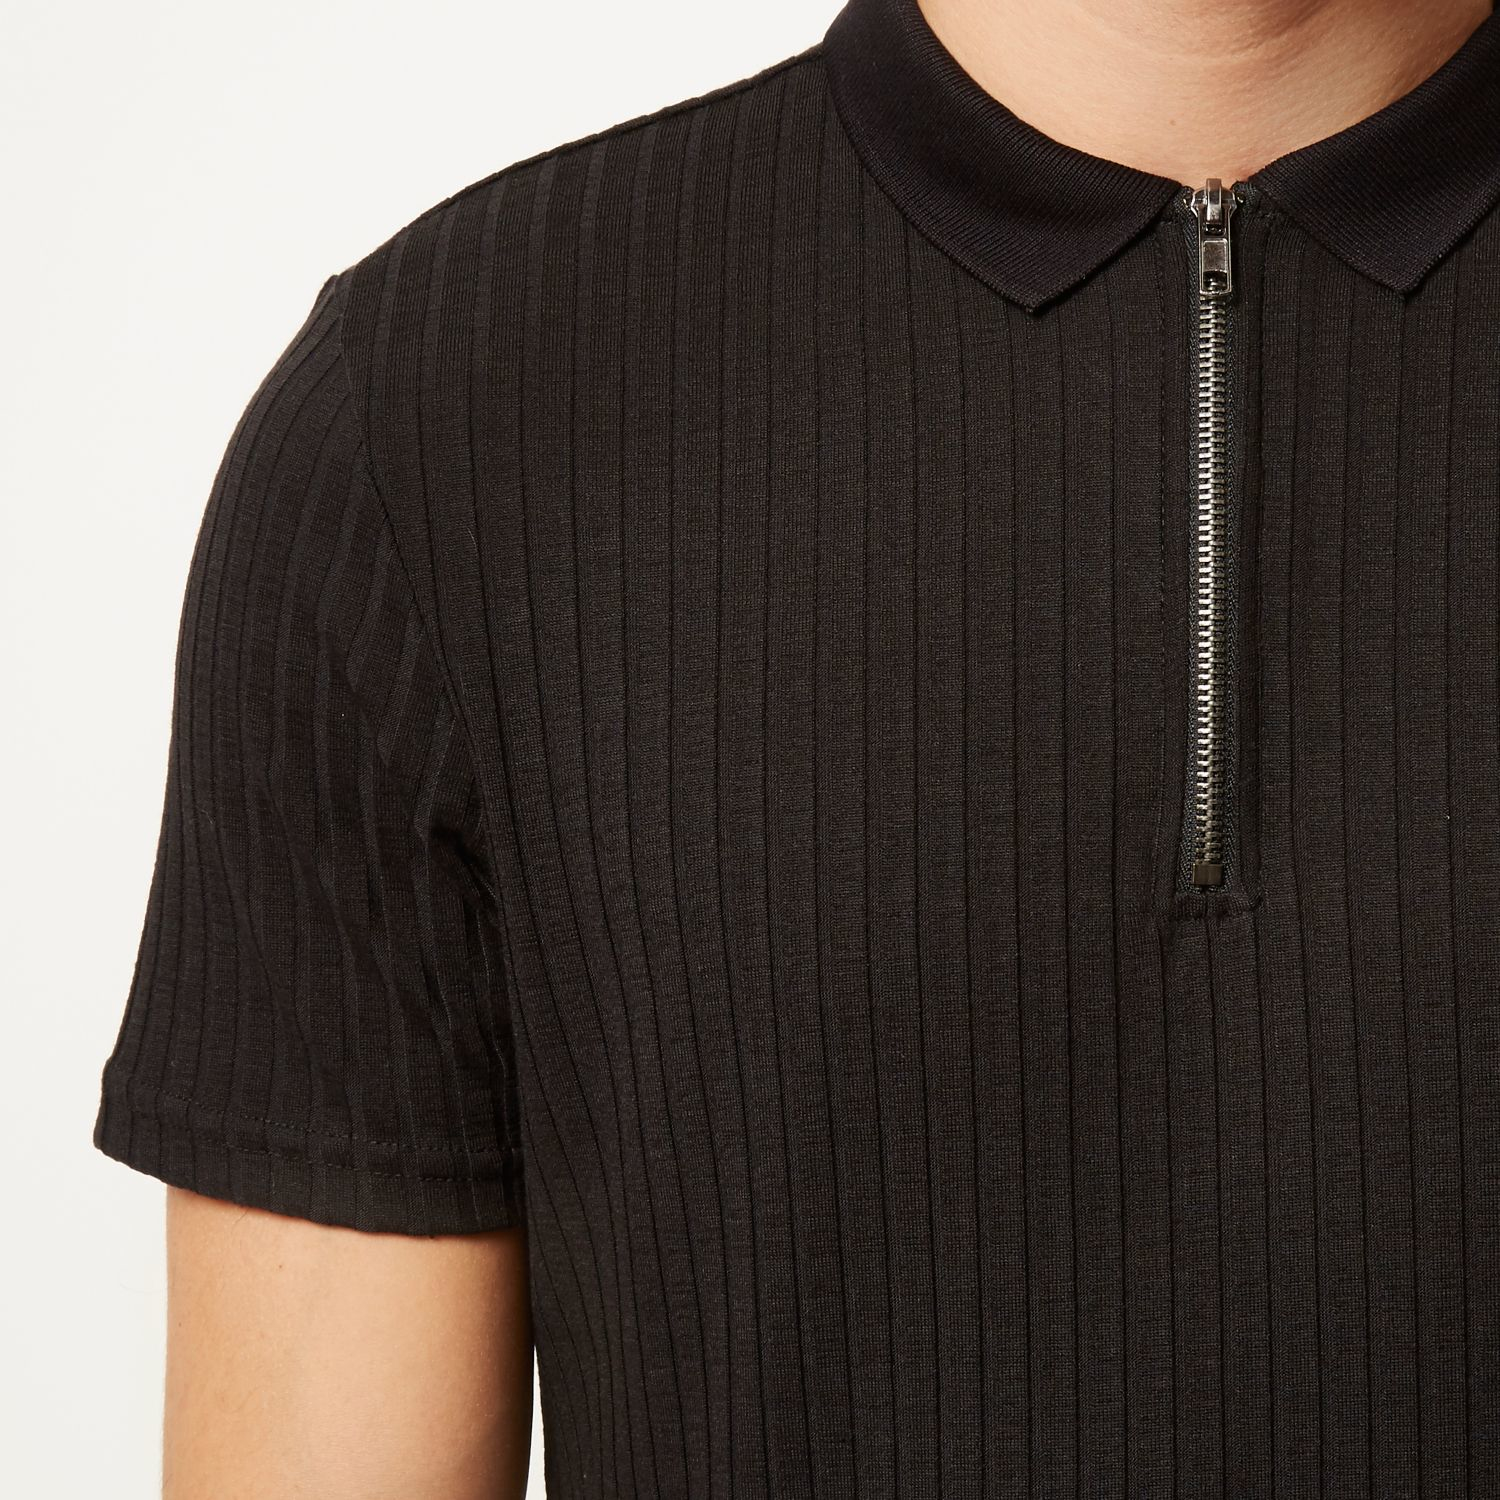 Lyst - River Island Black Chunky Ribbed Zip Neck Polo Shirt in Black ...